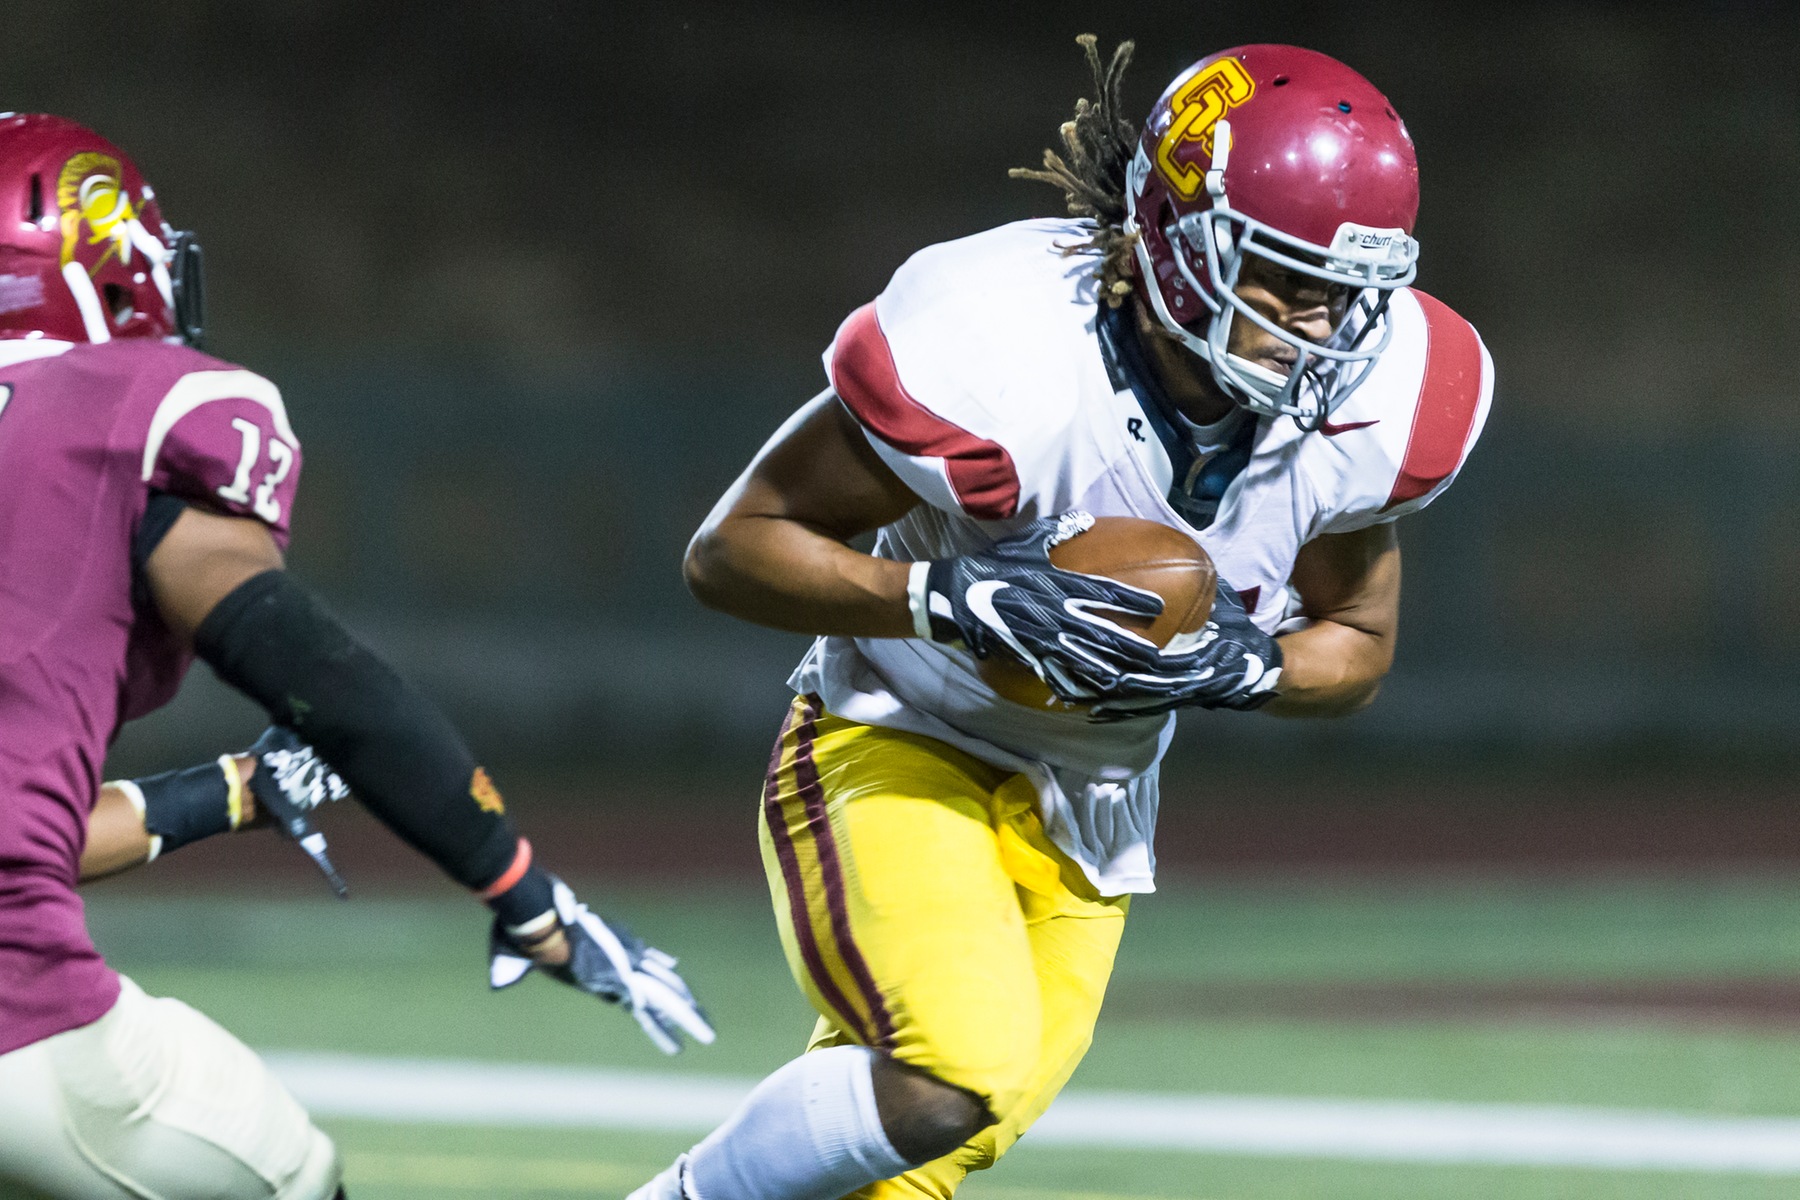 Glendale fell to Pasadena City College 38-7 Saturday Oct. 21 at PCC